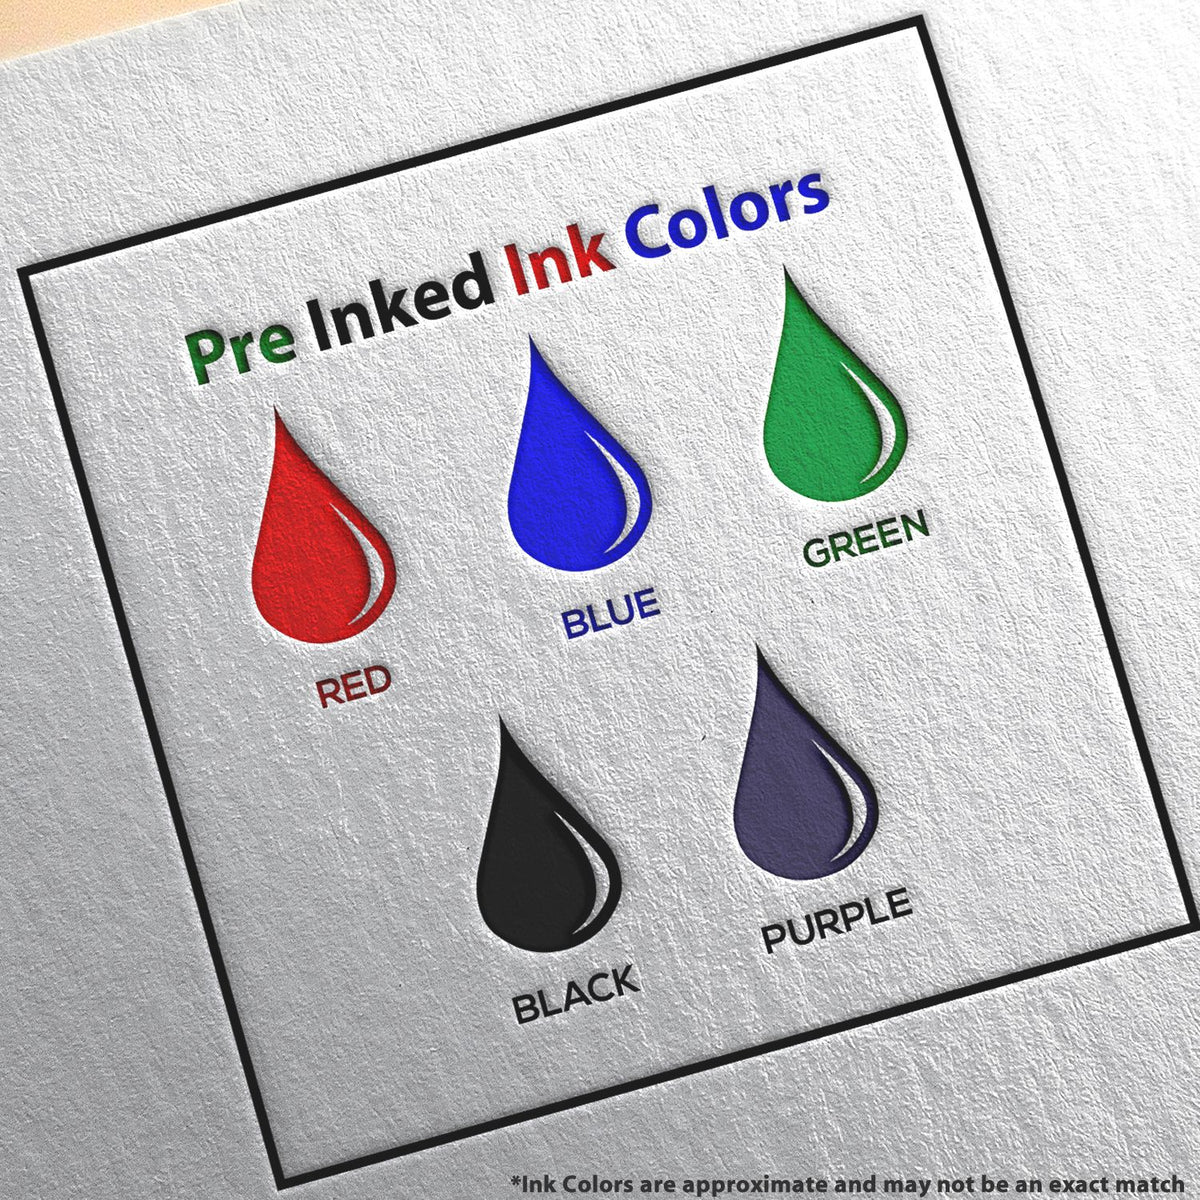 A picture showing the different ink colors or hues available for the Slim Pre-Inked Illinois Architect Seal Stamp product.